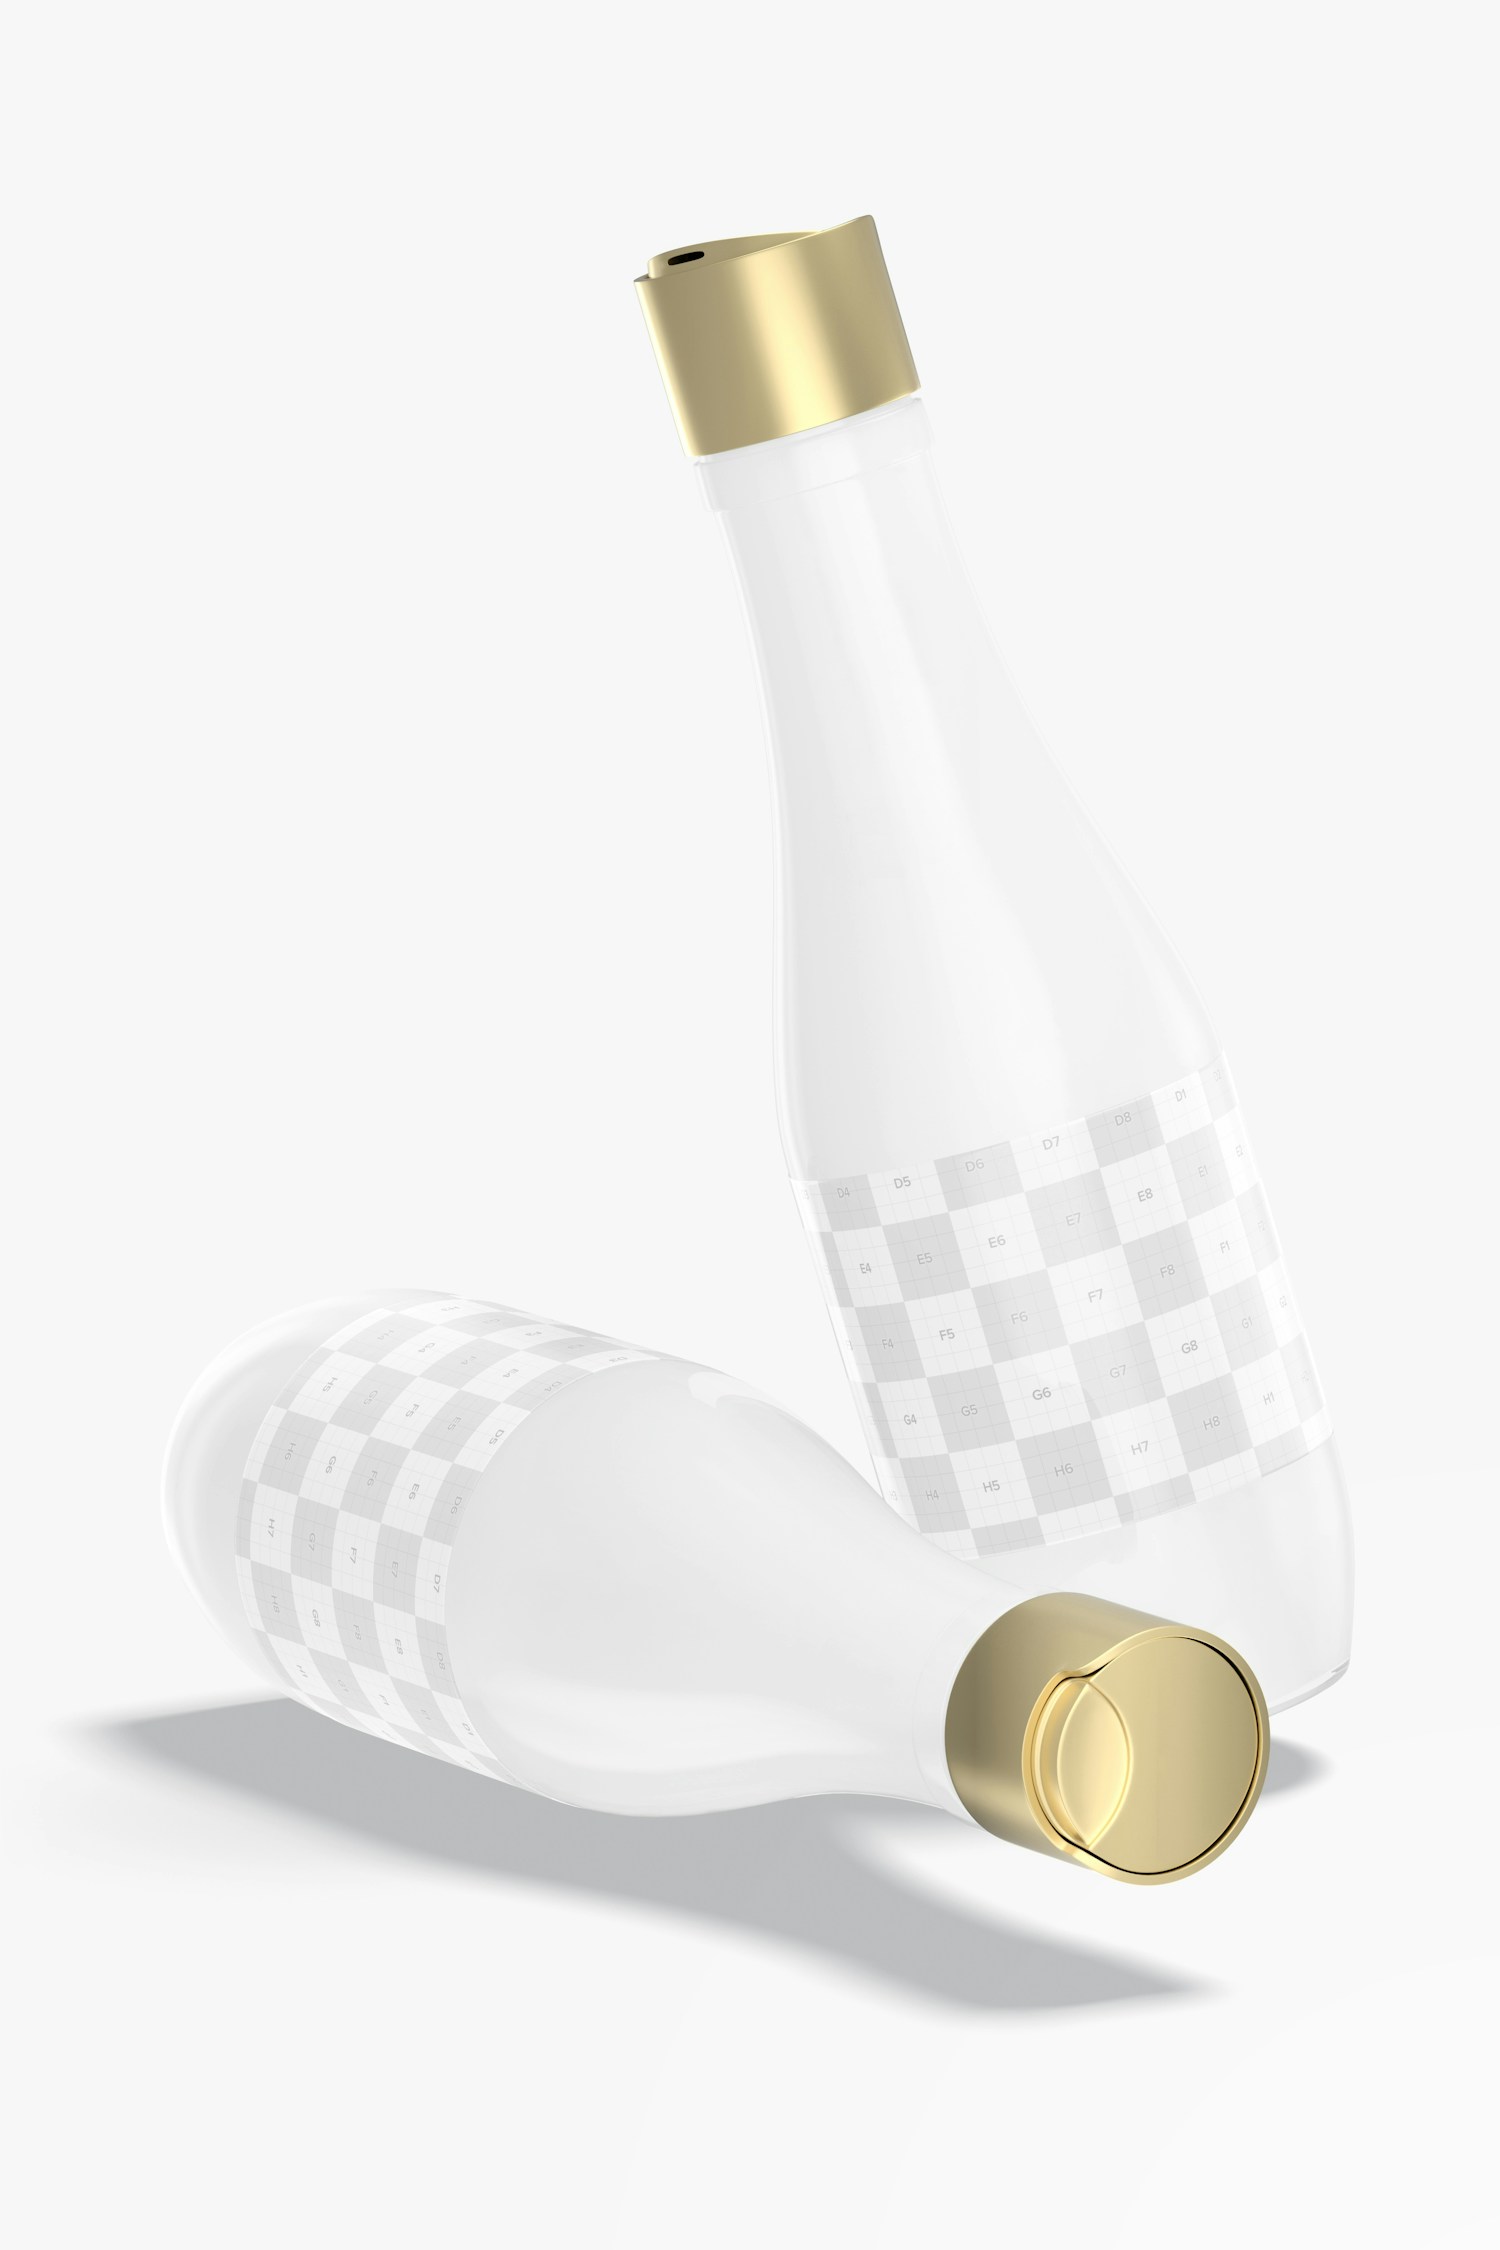 Woozy Bottles with Disc Top Cap Mockup, Standing and Dropped